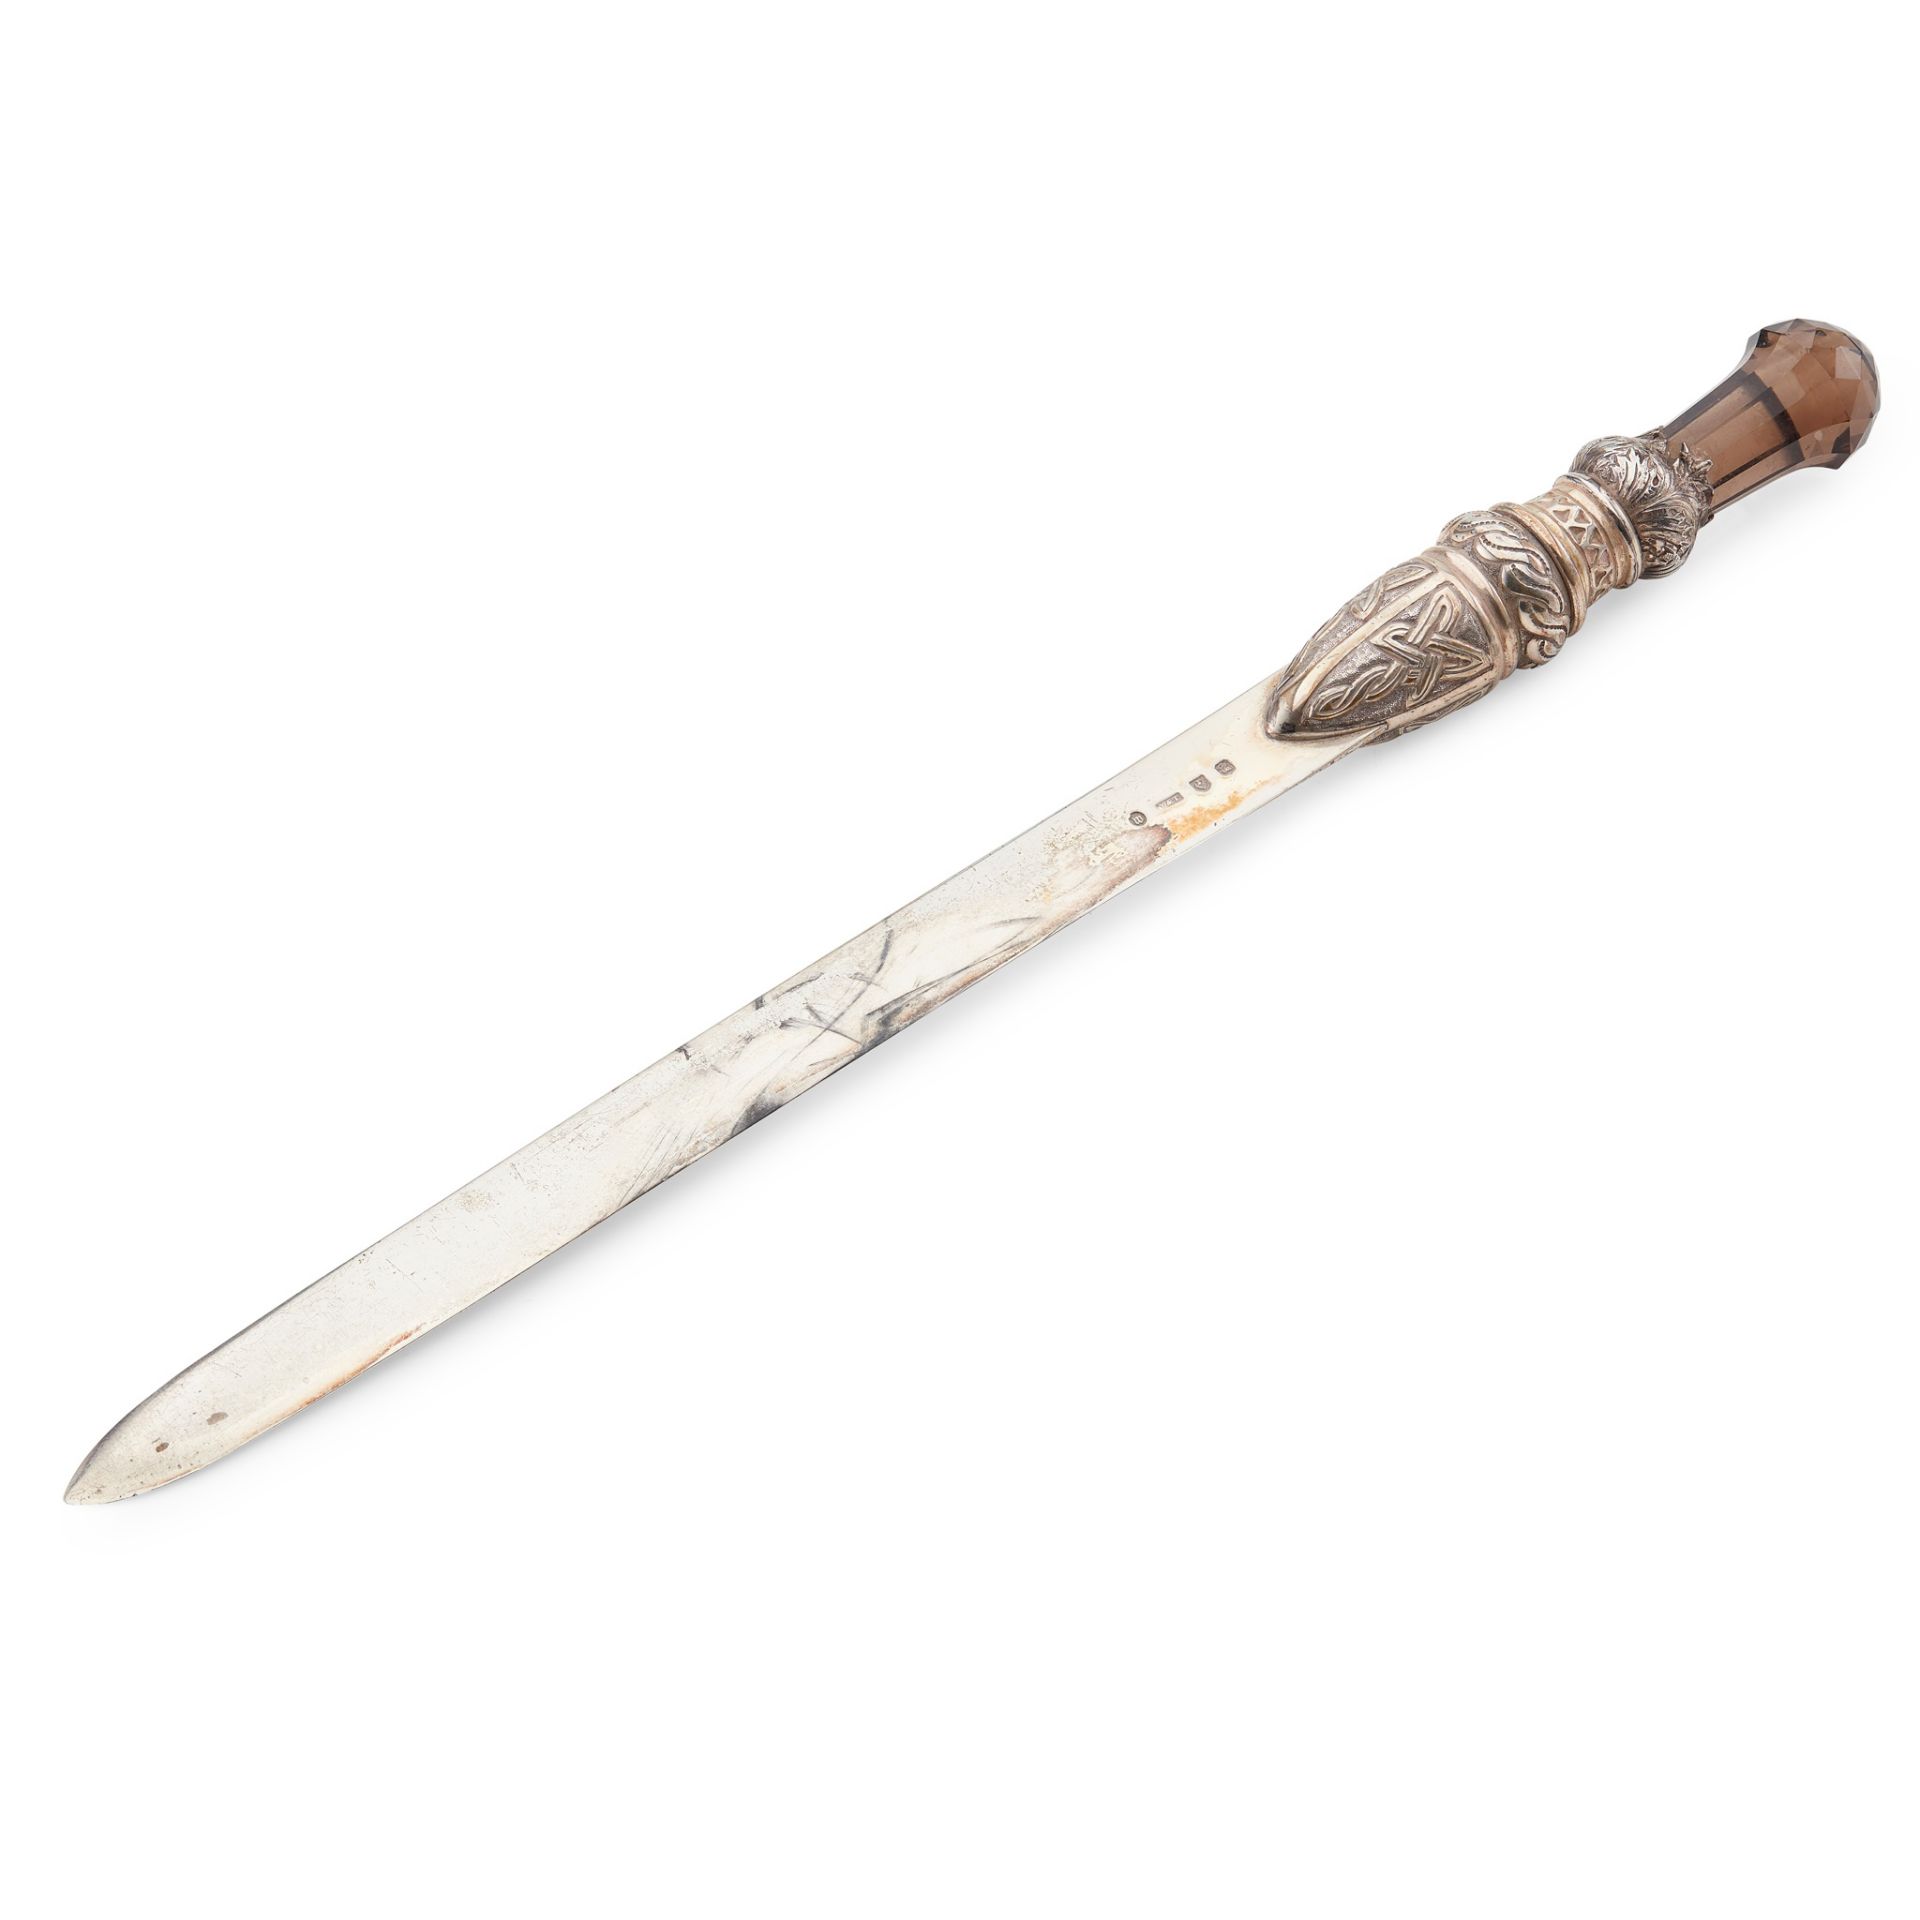 A VICTORIAN PAPER KNIFE YOUNG AND TATON, EDINBURGH 1902